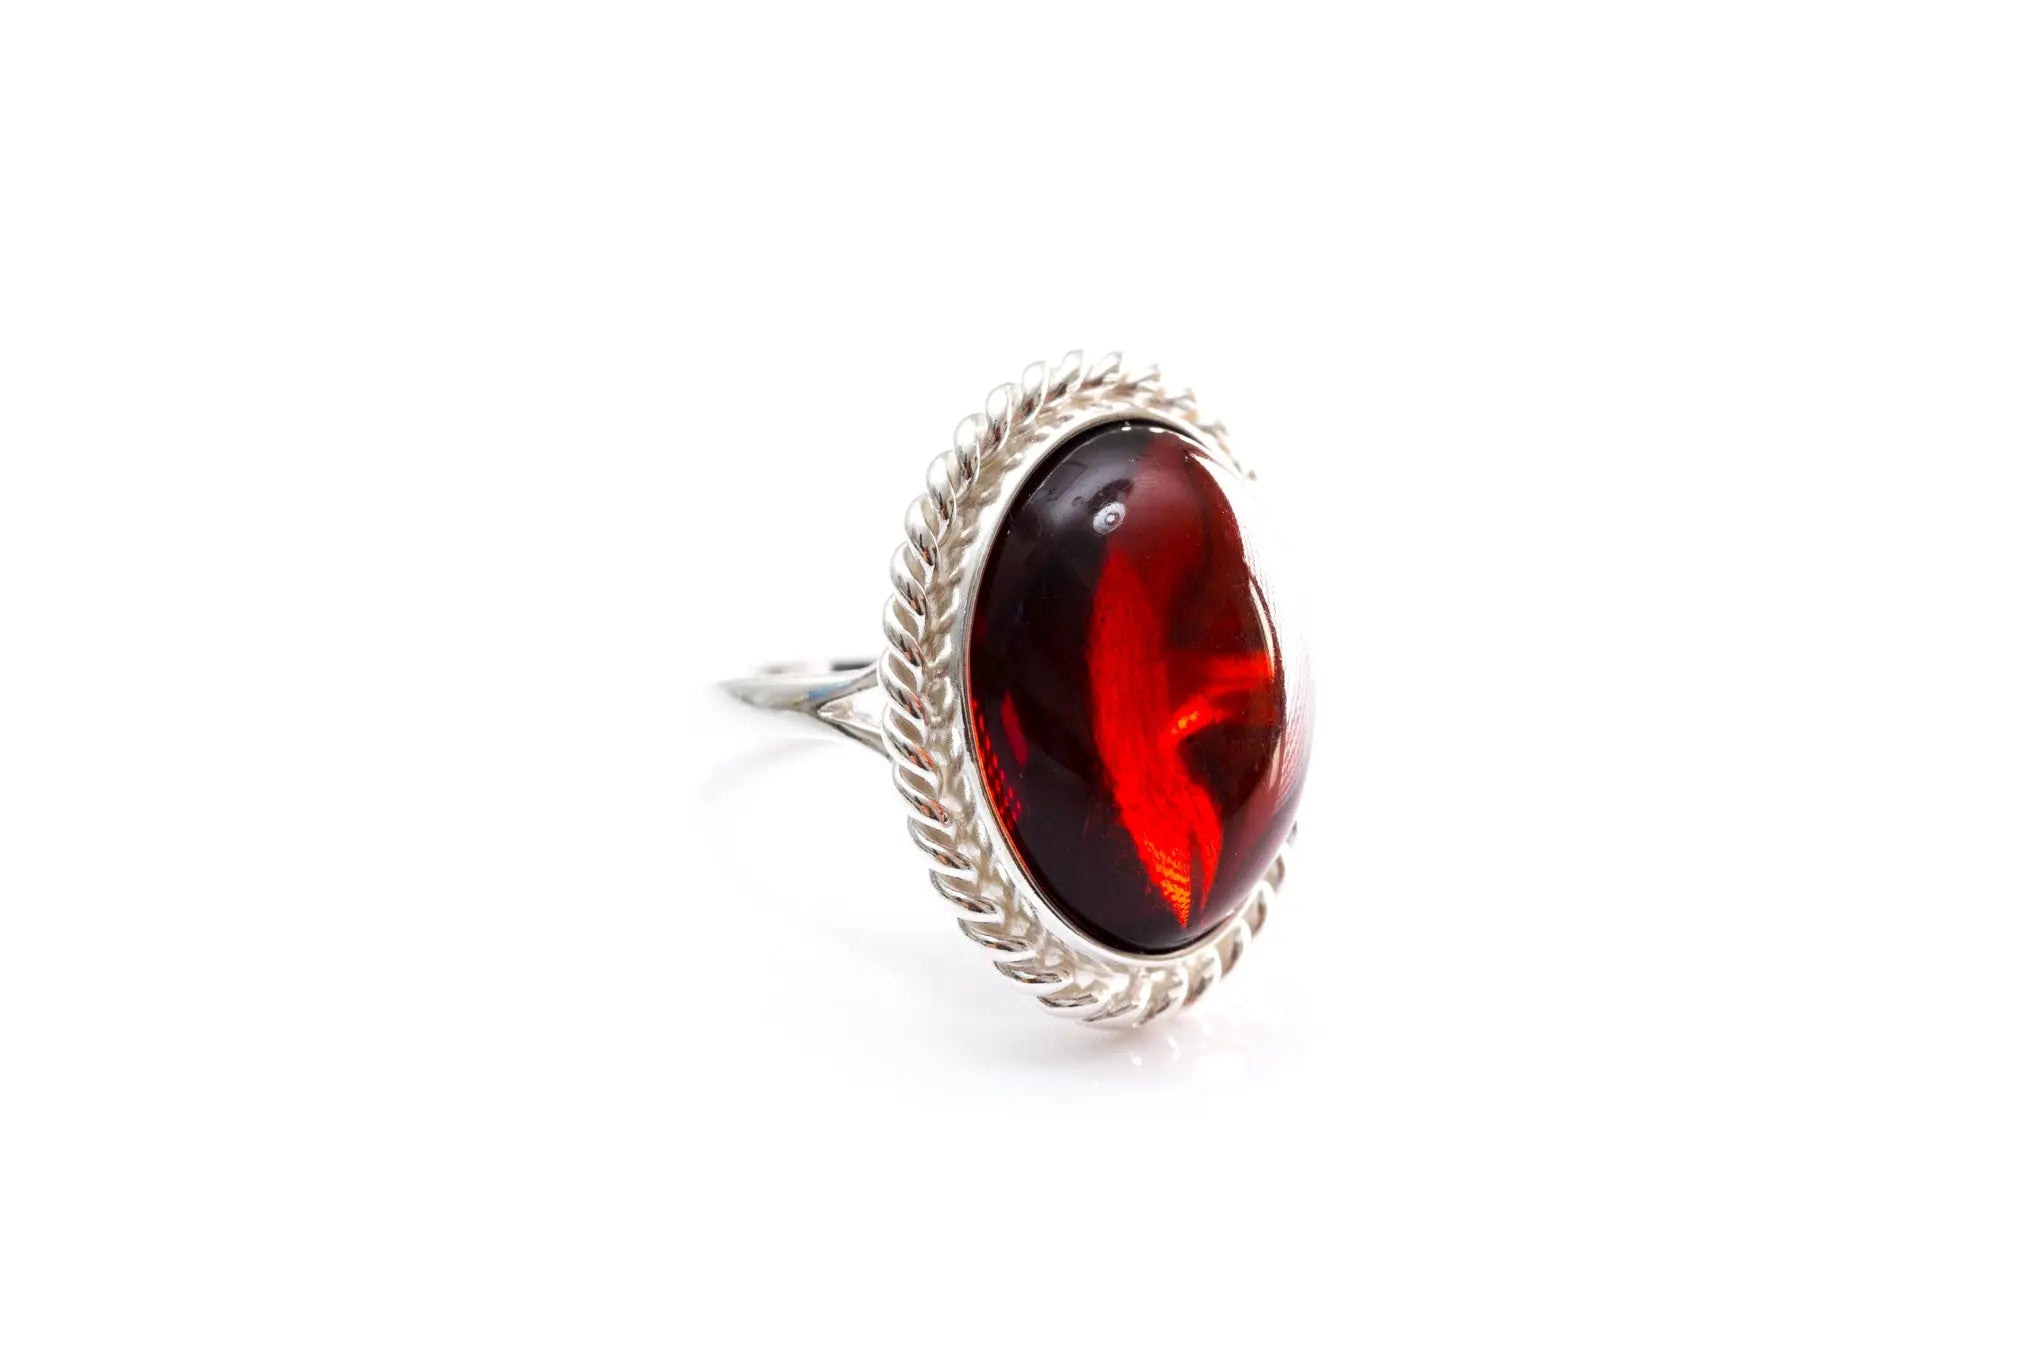 Cherry Red Amber Quintessence Statement Ring- Rings- Baltic Beauty